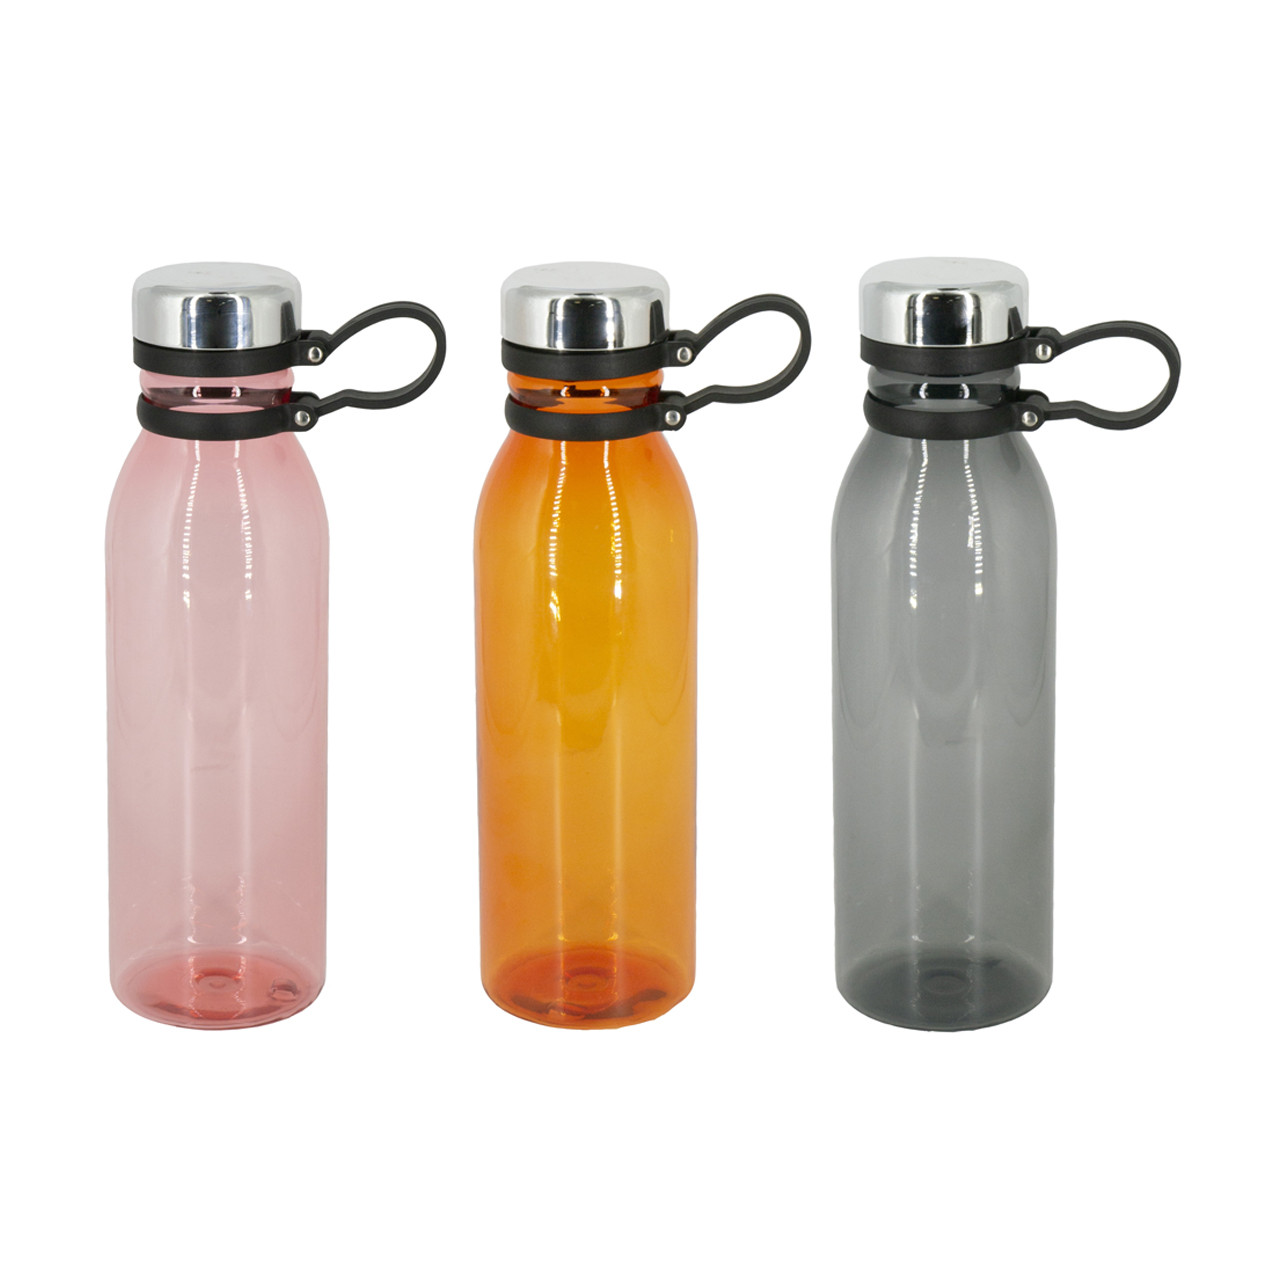 Home Concepts 800ml Water Bottle with Screw Top Lid, Assorted Colors